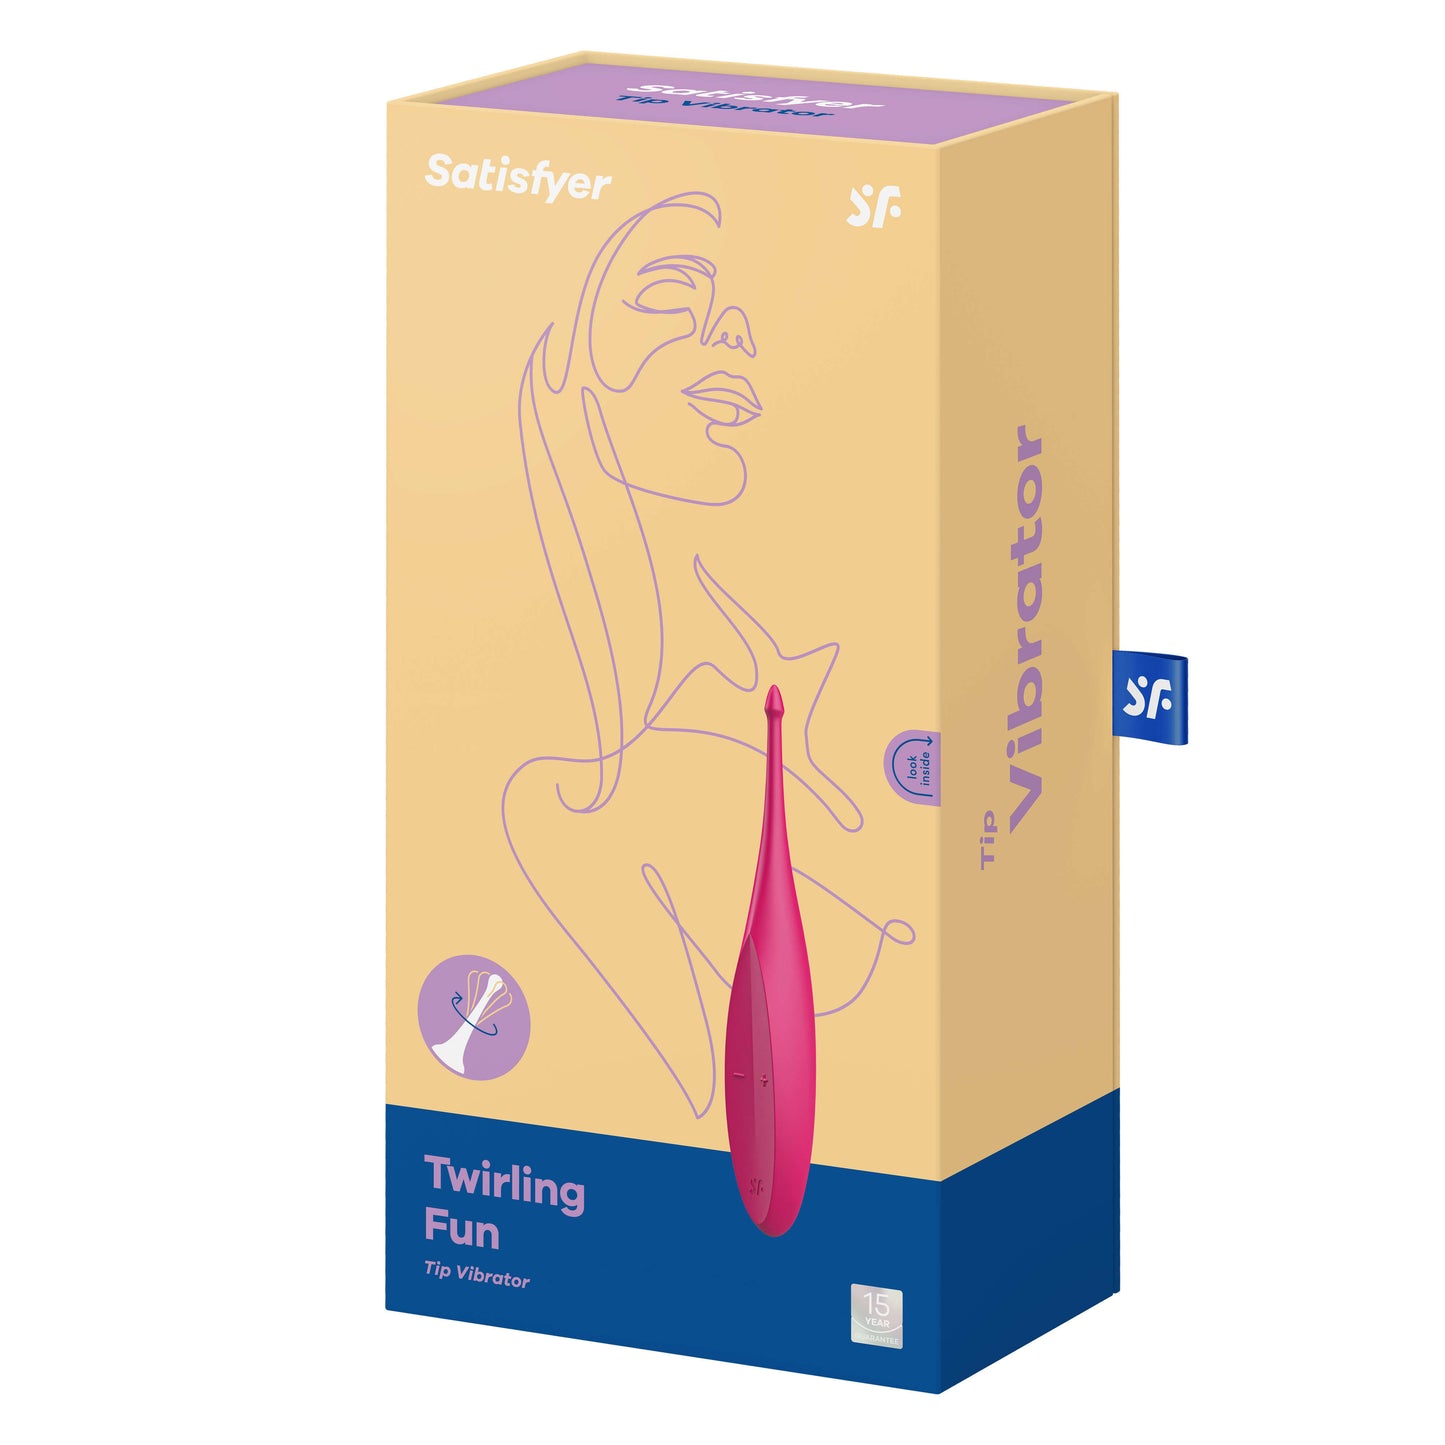 Satisfyer Twirling Fun packaging - by The Bigger O an online sex toy shop. We ship to USA, Canada and the UK.